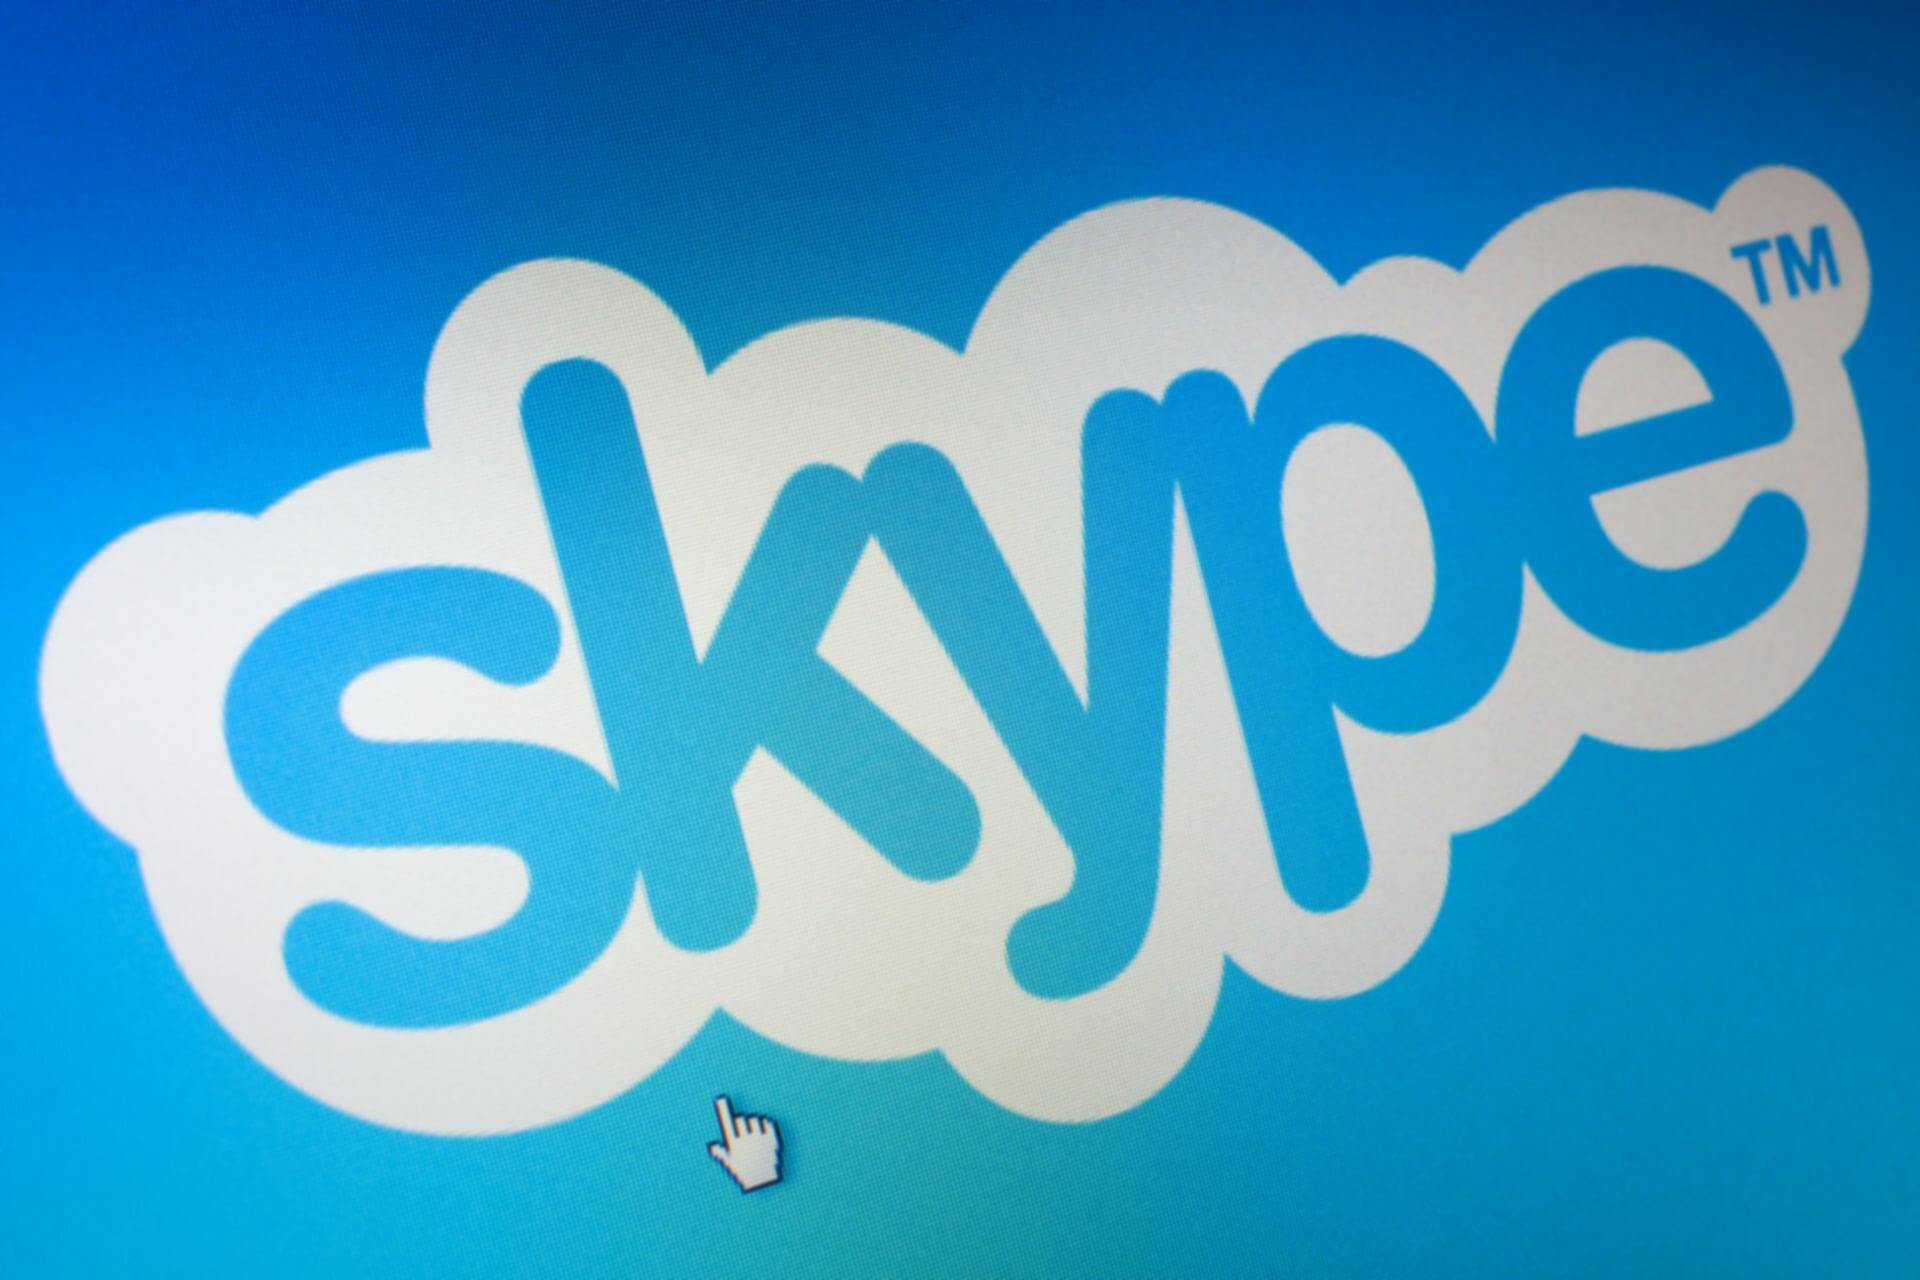 Please check your network settings and try again Skype